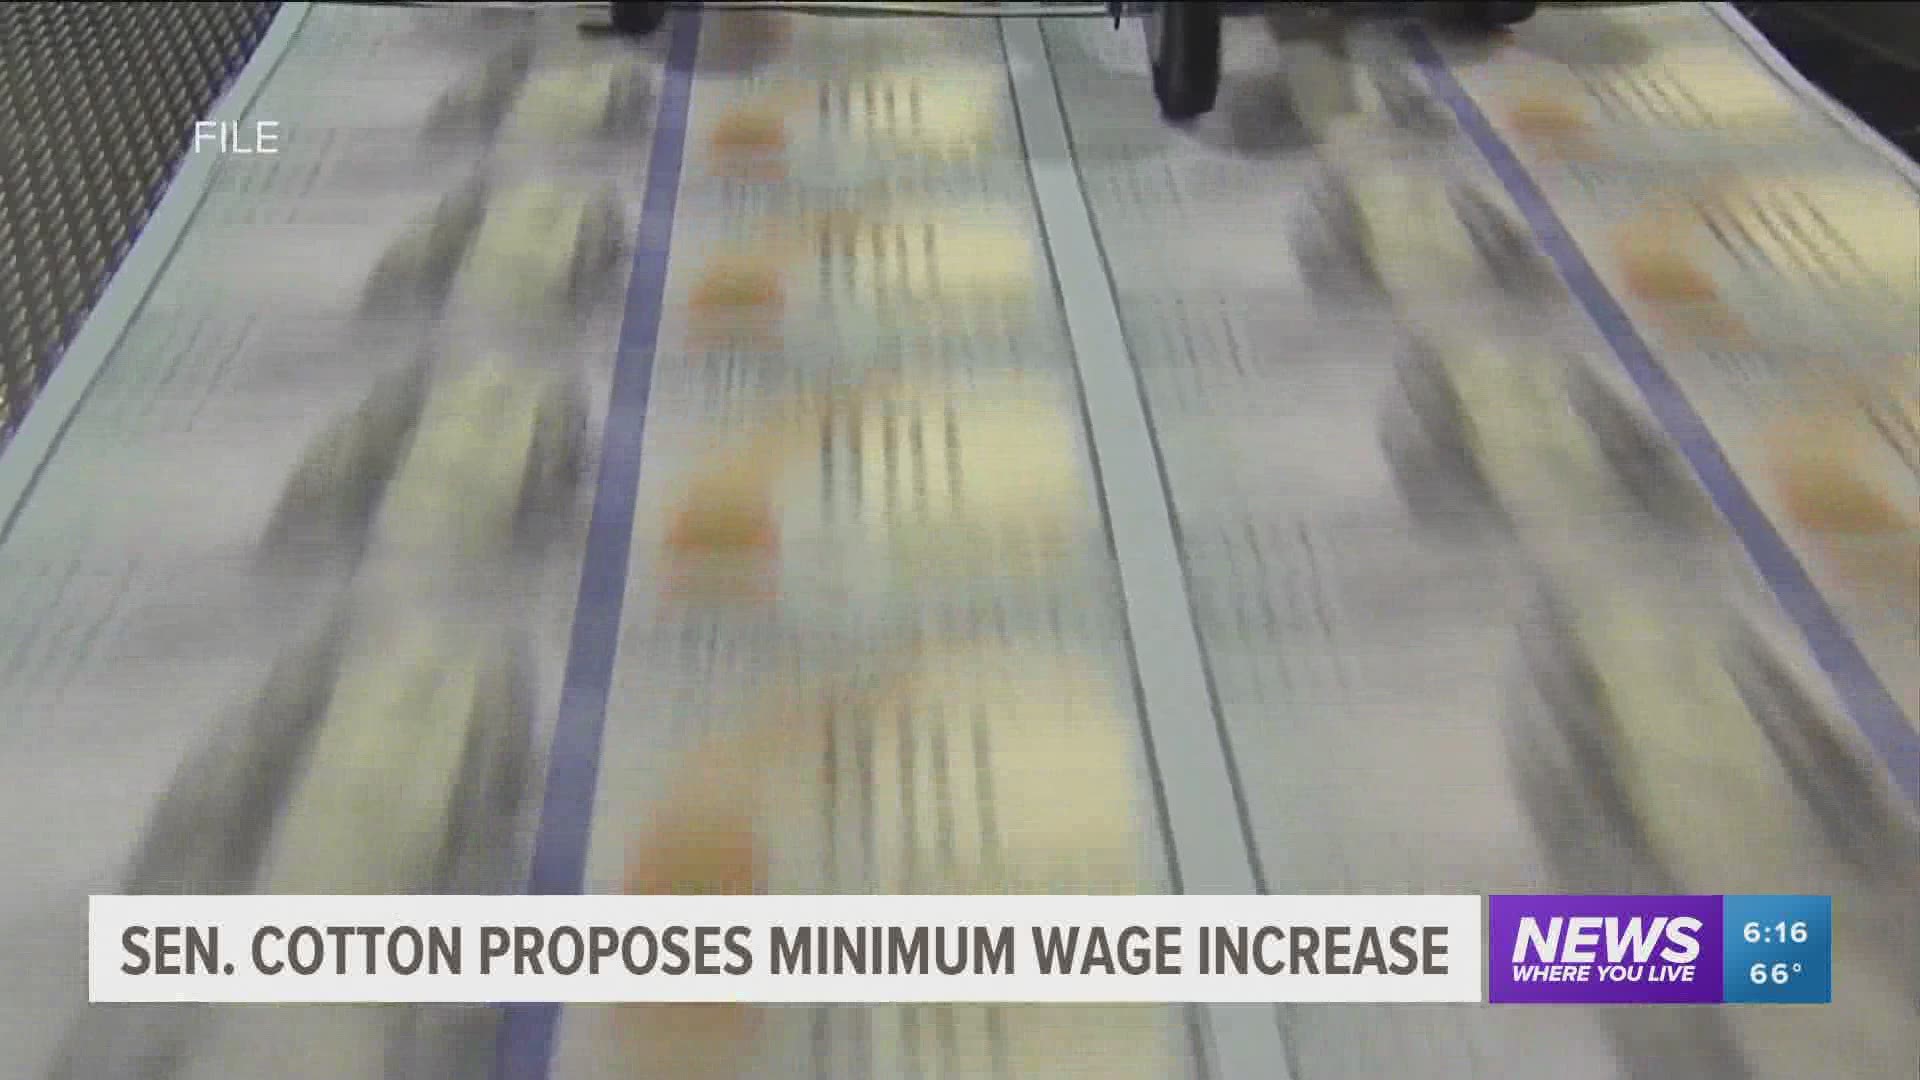 Sen. Tom Cotton proposes bill that would increase minimum wage to $10